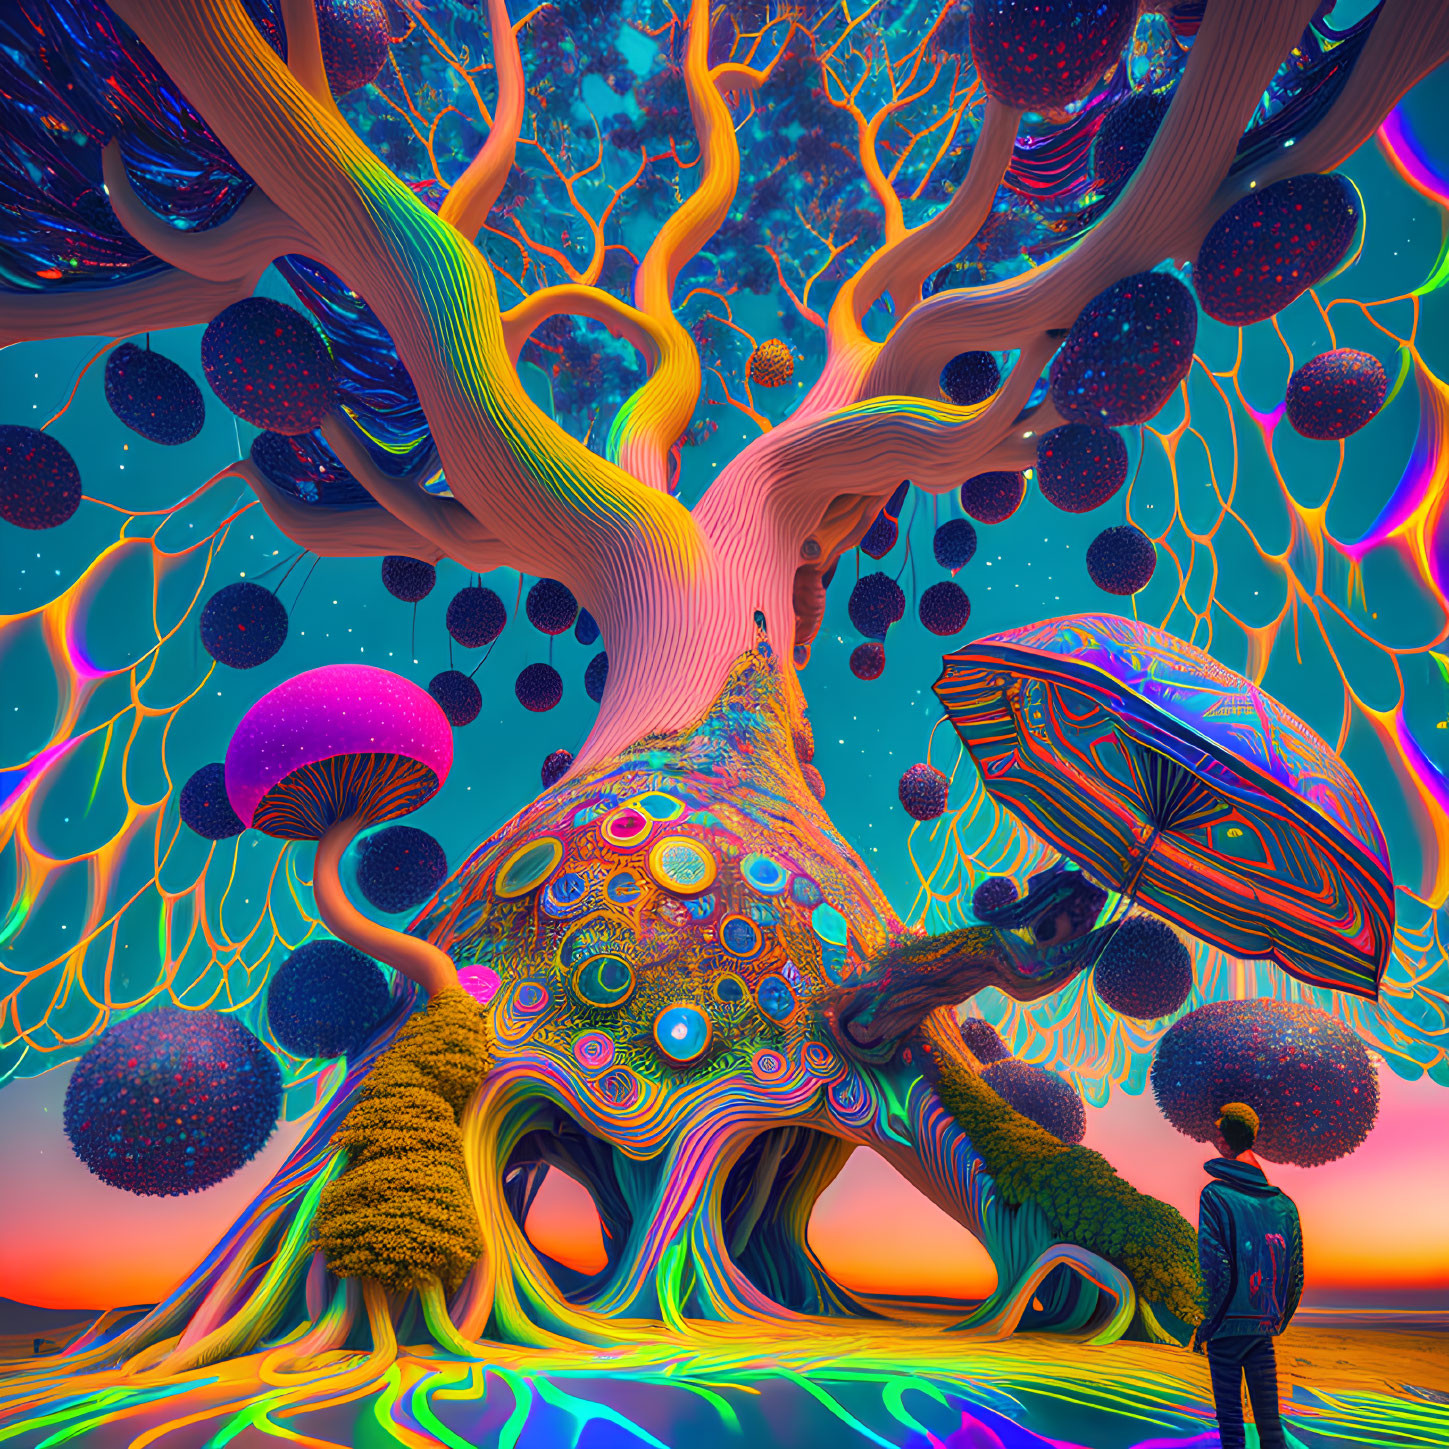 Colorful psychedelic landscape with giant tree, orbs, mushrooms, and starlit sky